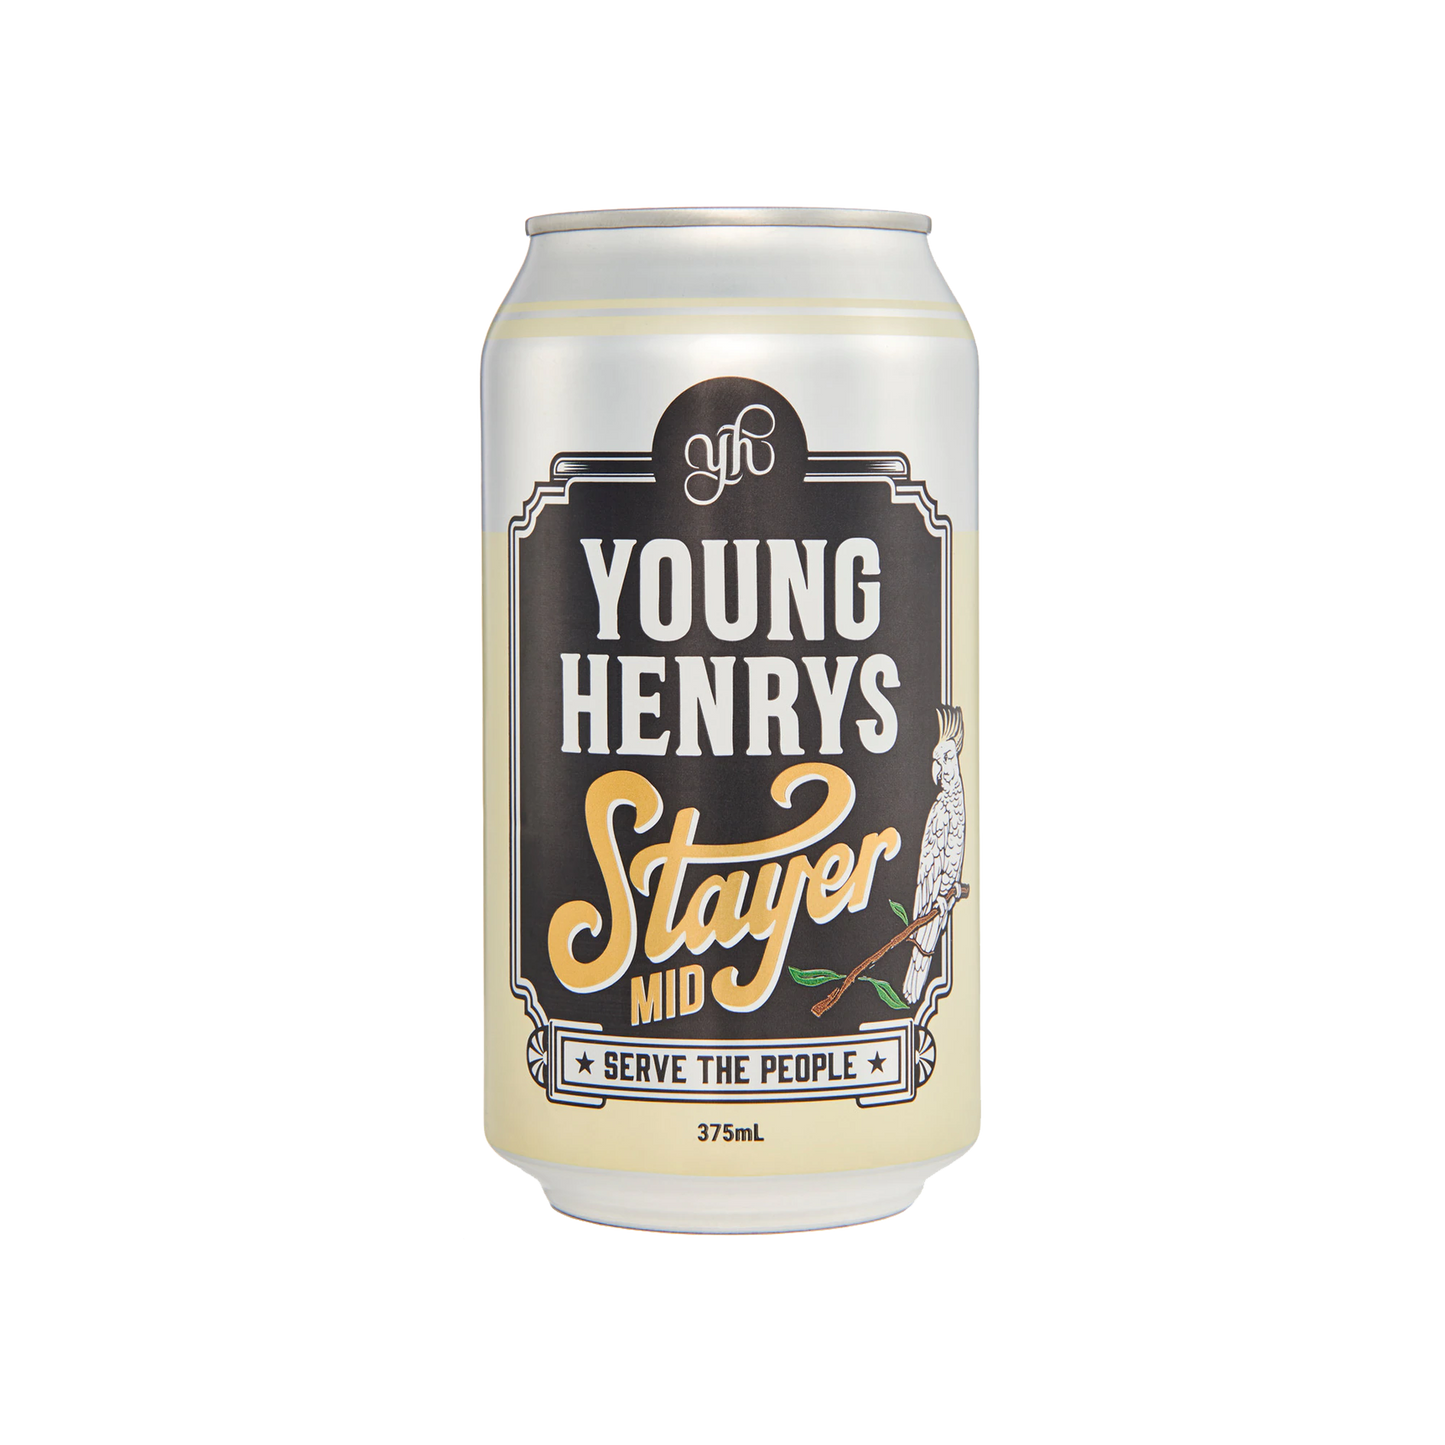 Young Henrys Stayer 375ml